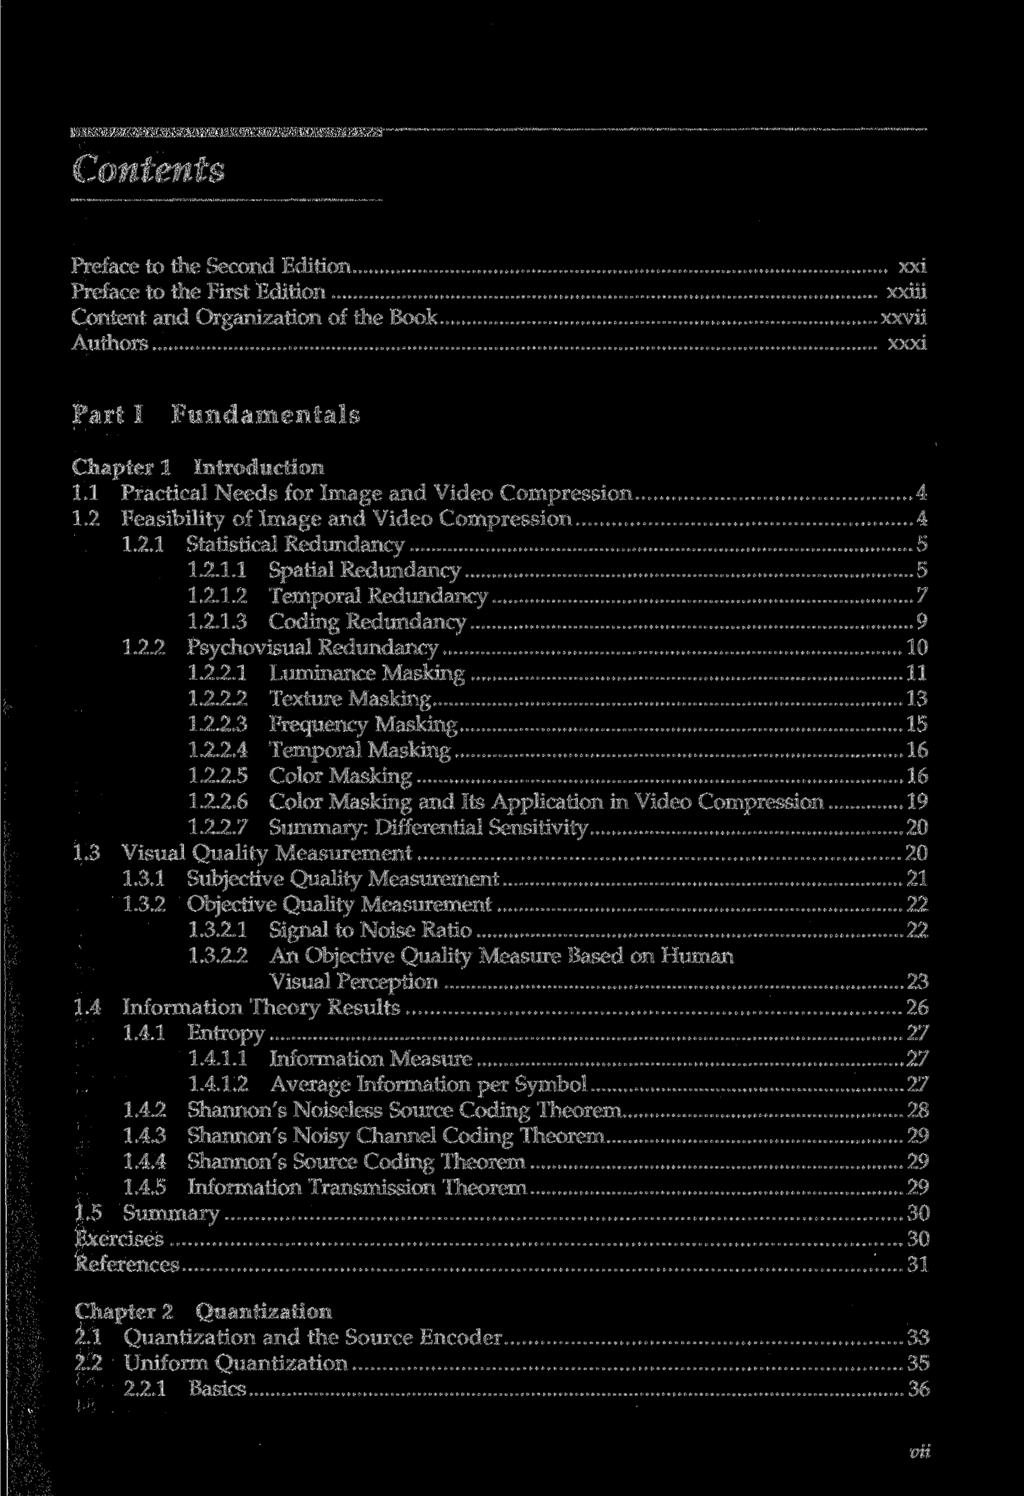 Contents Preface to the Second Edition Preface to the First Edition Content and Organization of the Book Authors xxi xxiii xxvii xxxi Part I Fundamentals Chapter 1 Introduction 1.